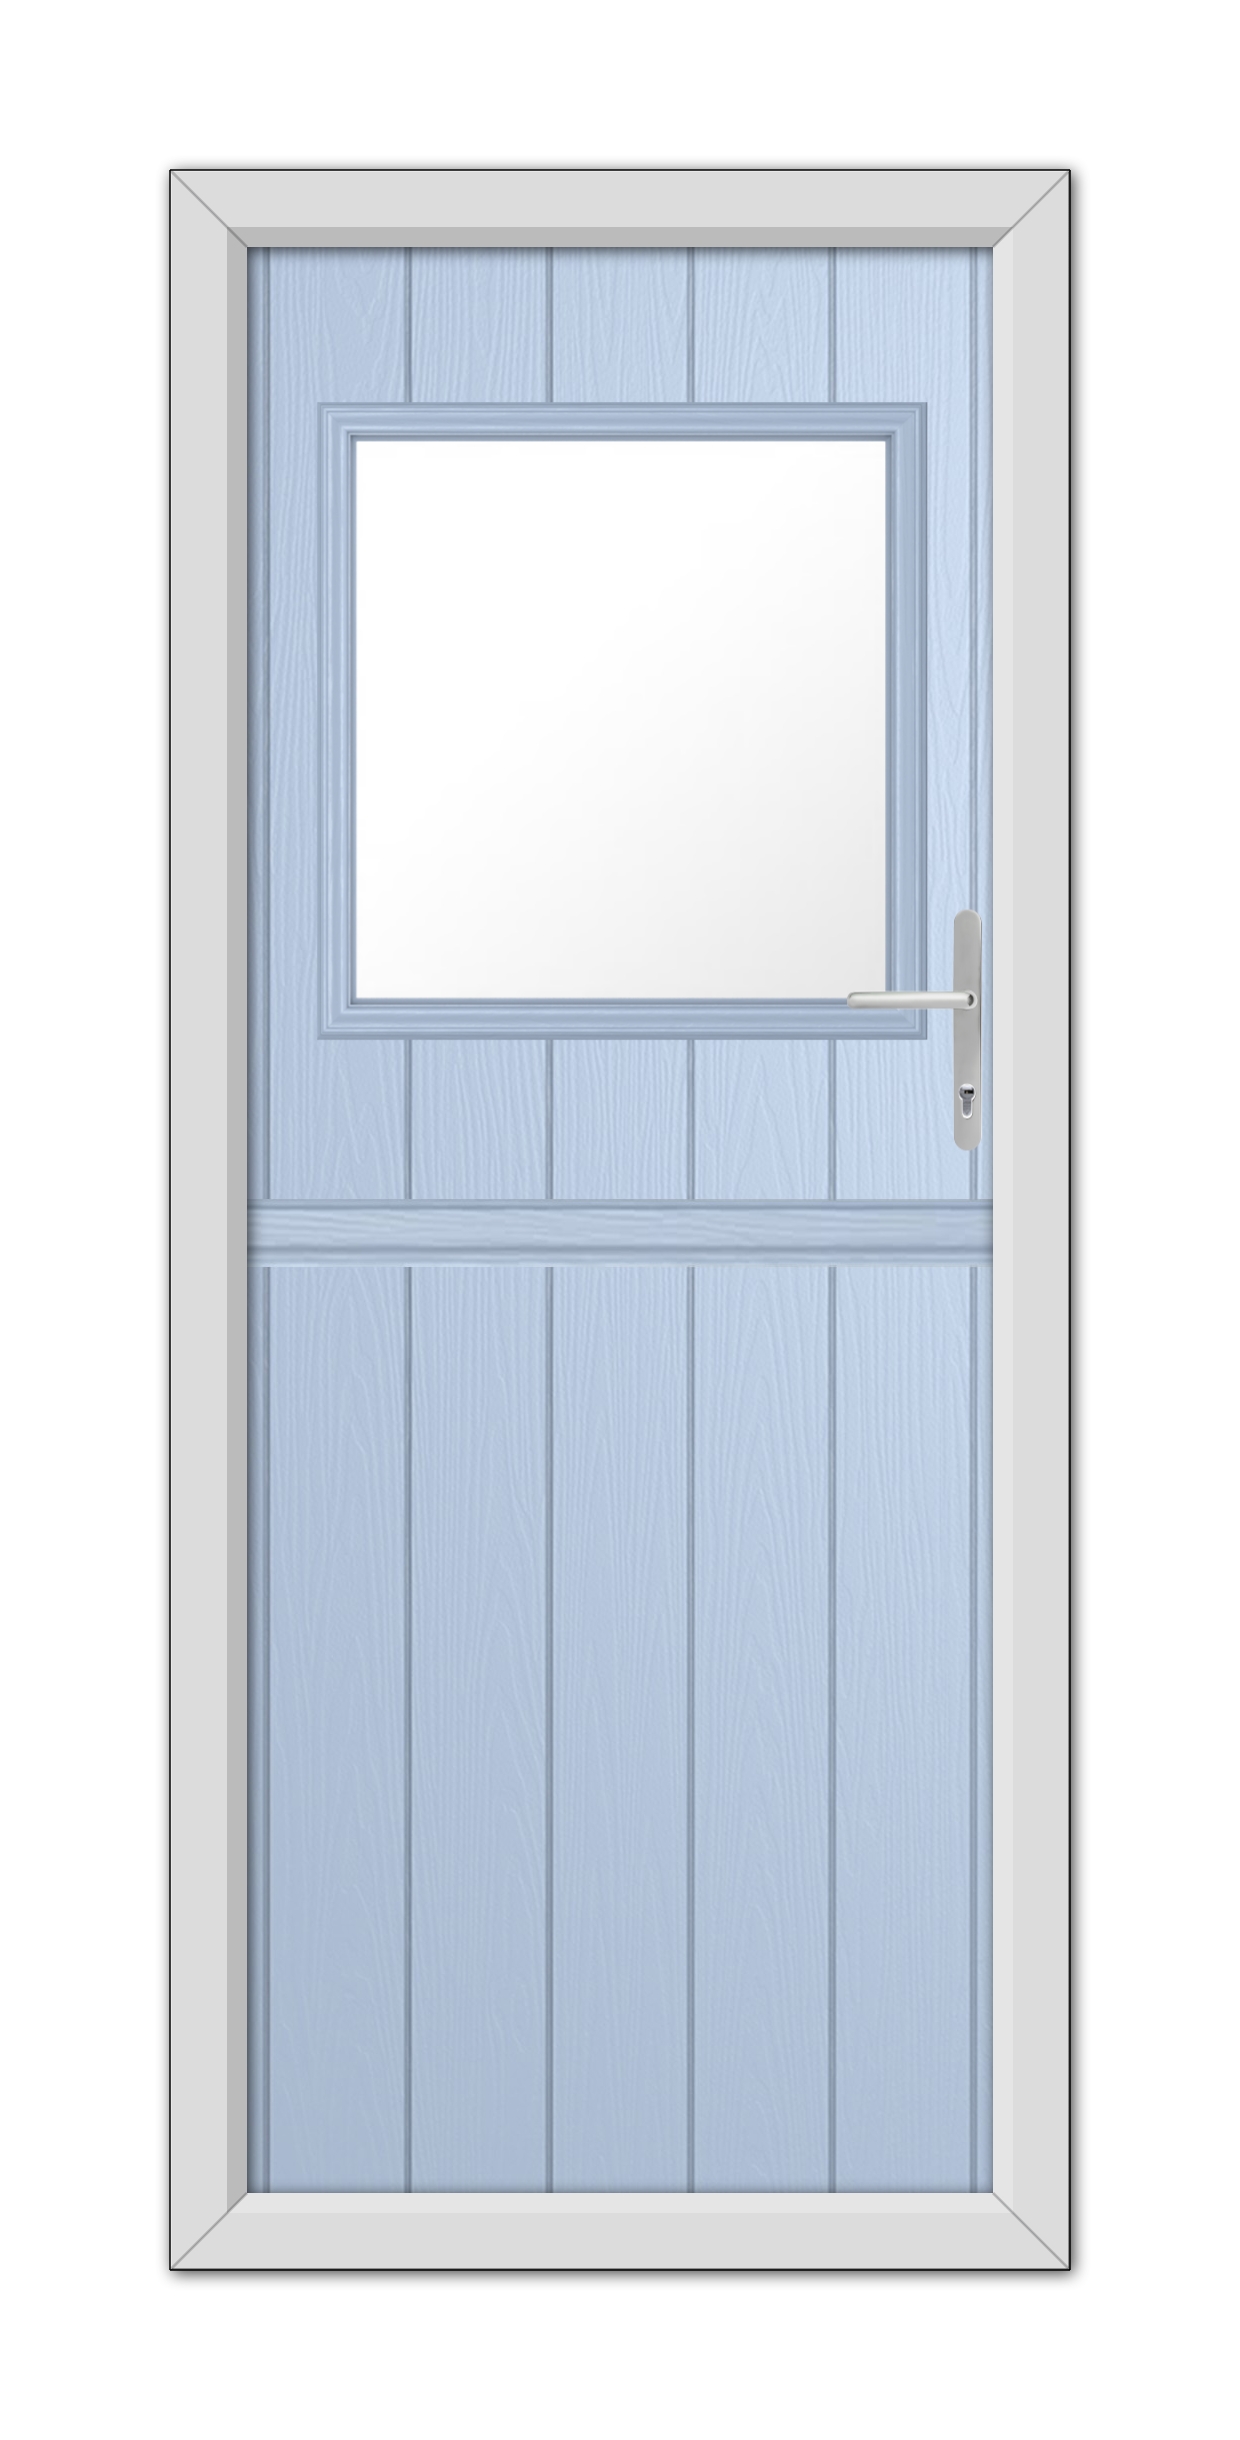 A modern Duck Egg Blue Fife Stable Composite Door featuring a large rectangular window at the top, a silver handle on the right side, and a white frame.